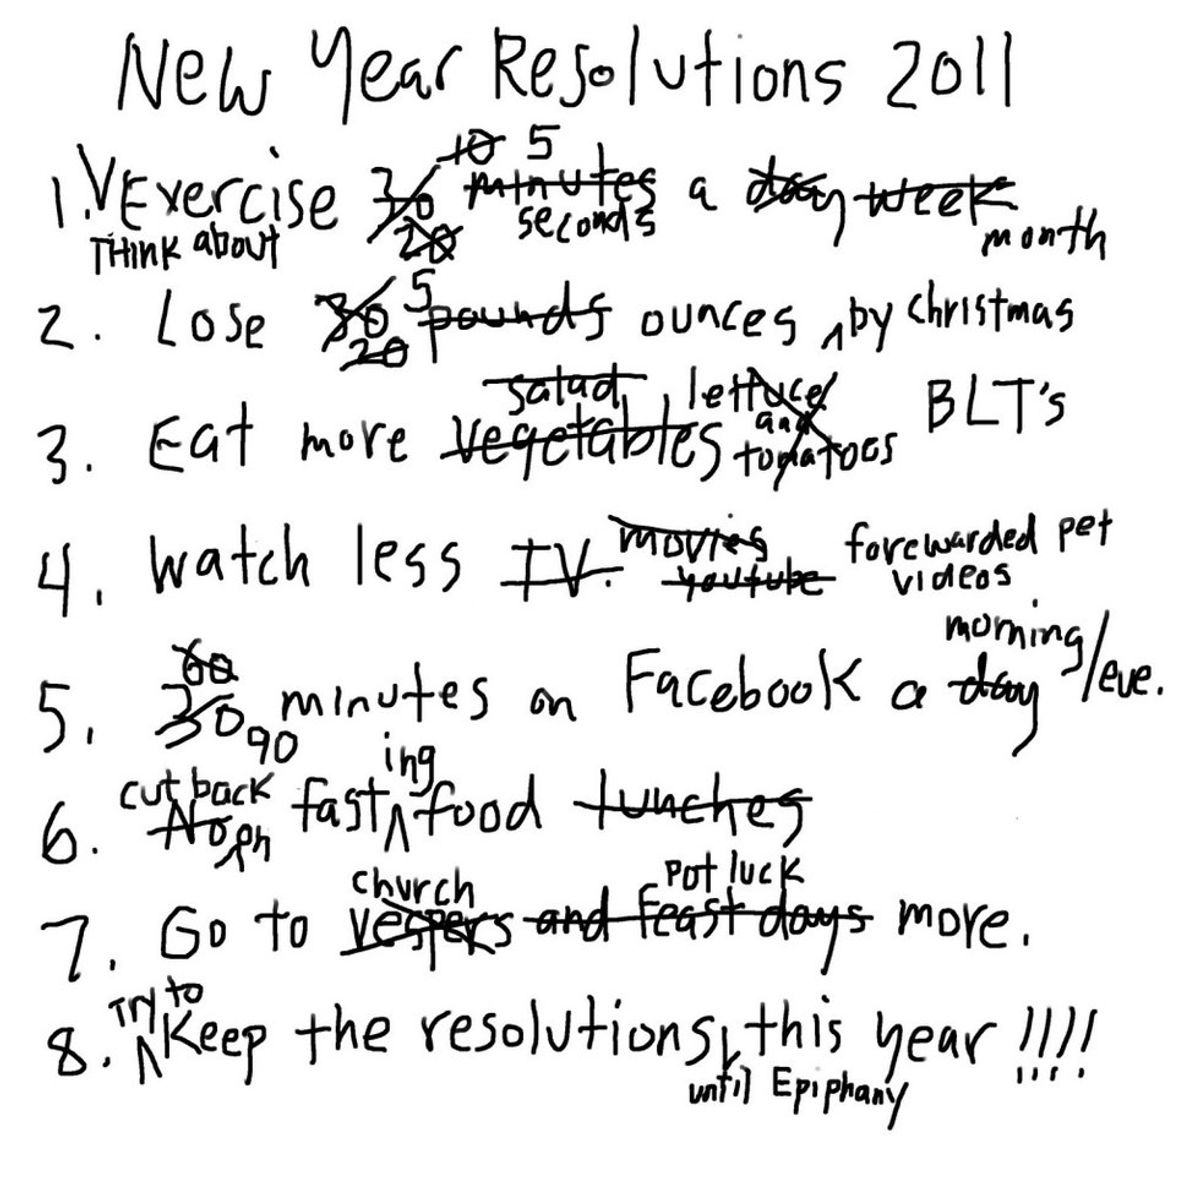 10 New Year Resolutions You Should Give Up On Now